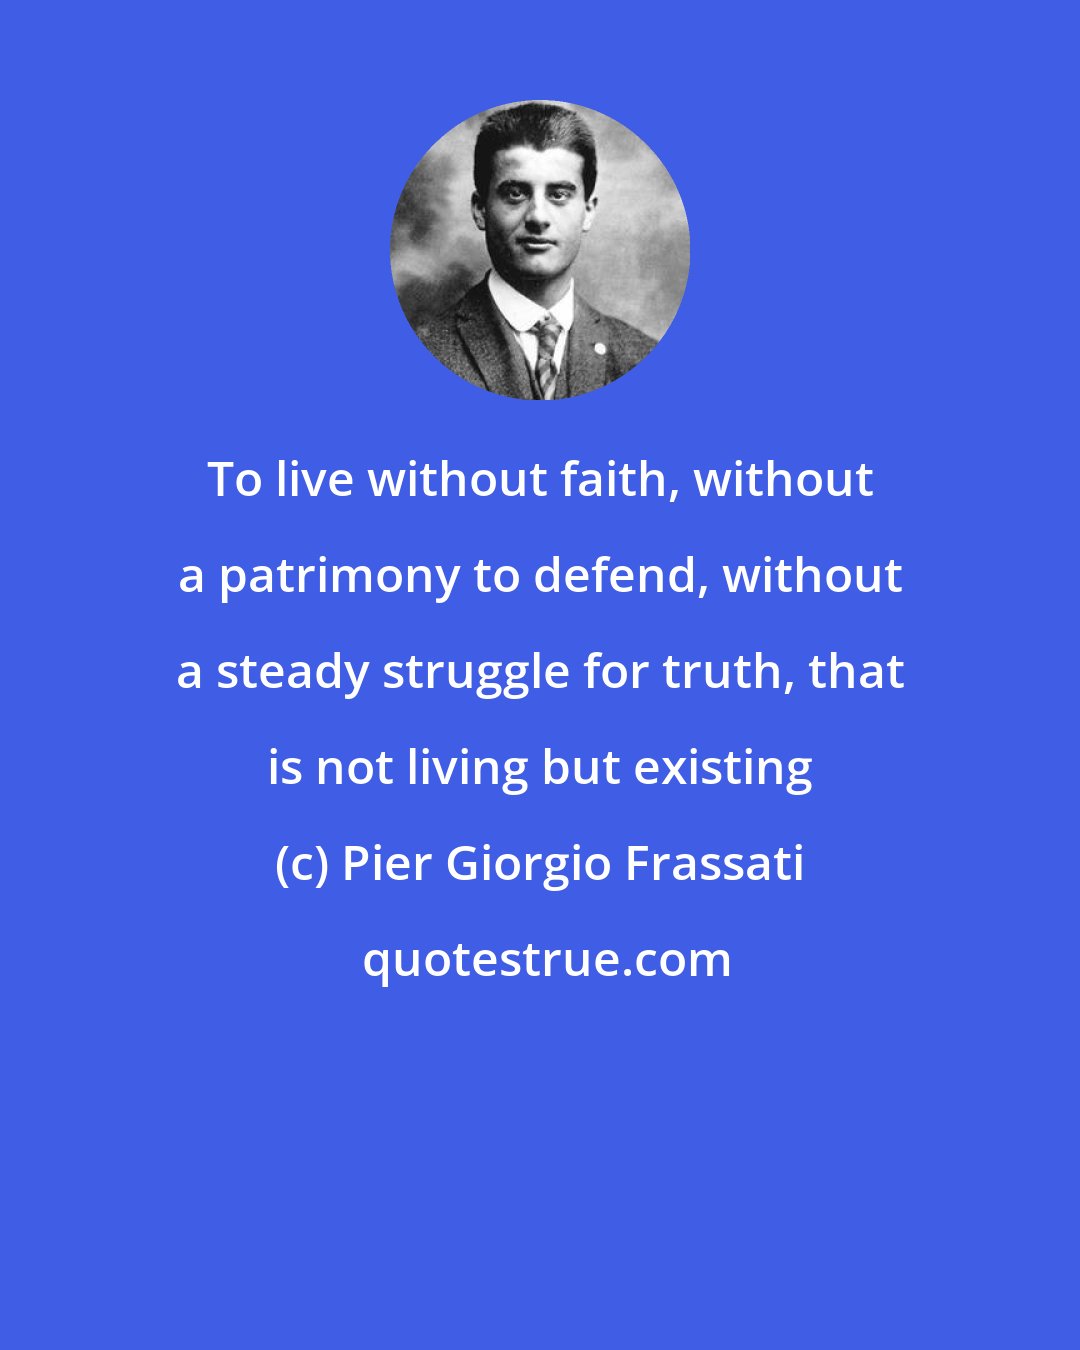 Pier Giorgio Frassati: To live without faith, without a patrimony to defend, without a steady struggle for truth, that is not living but existing